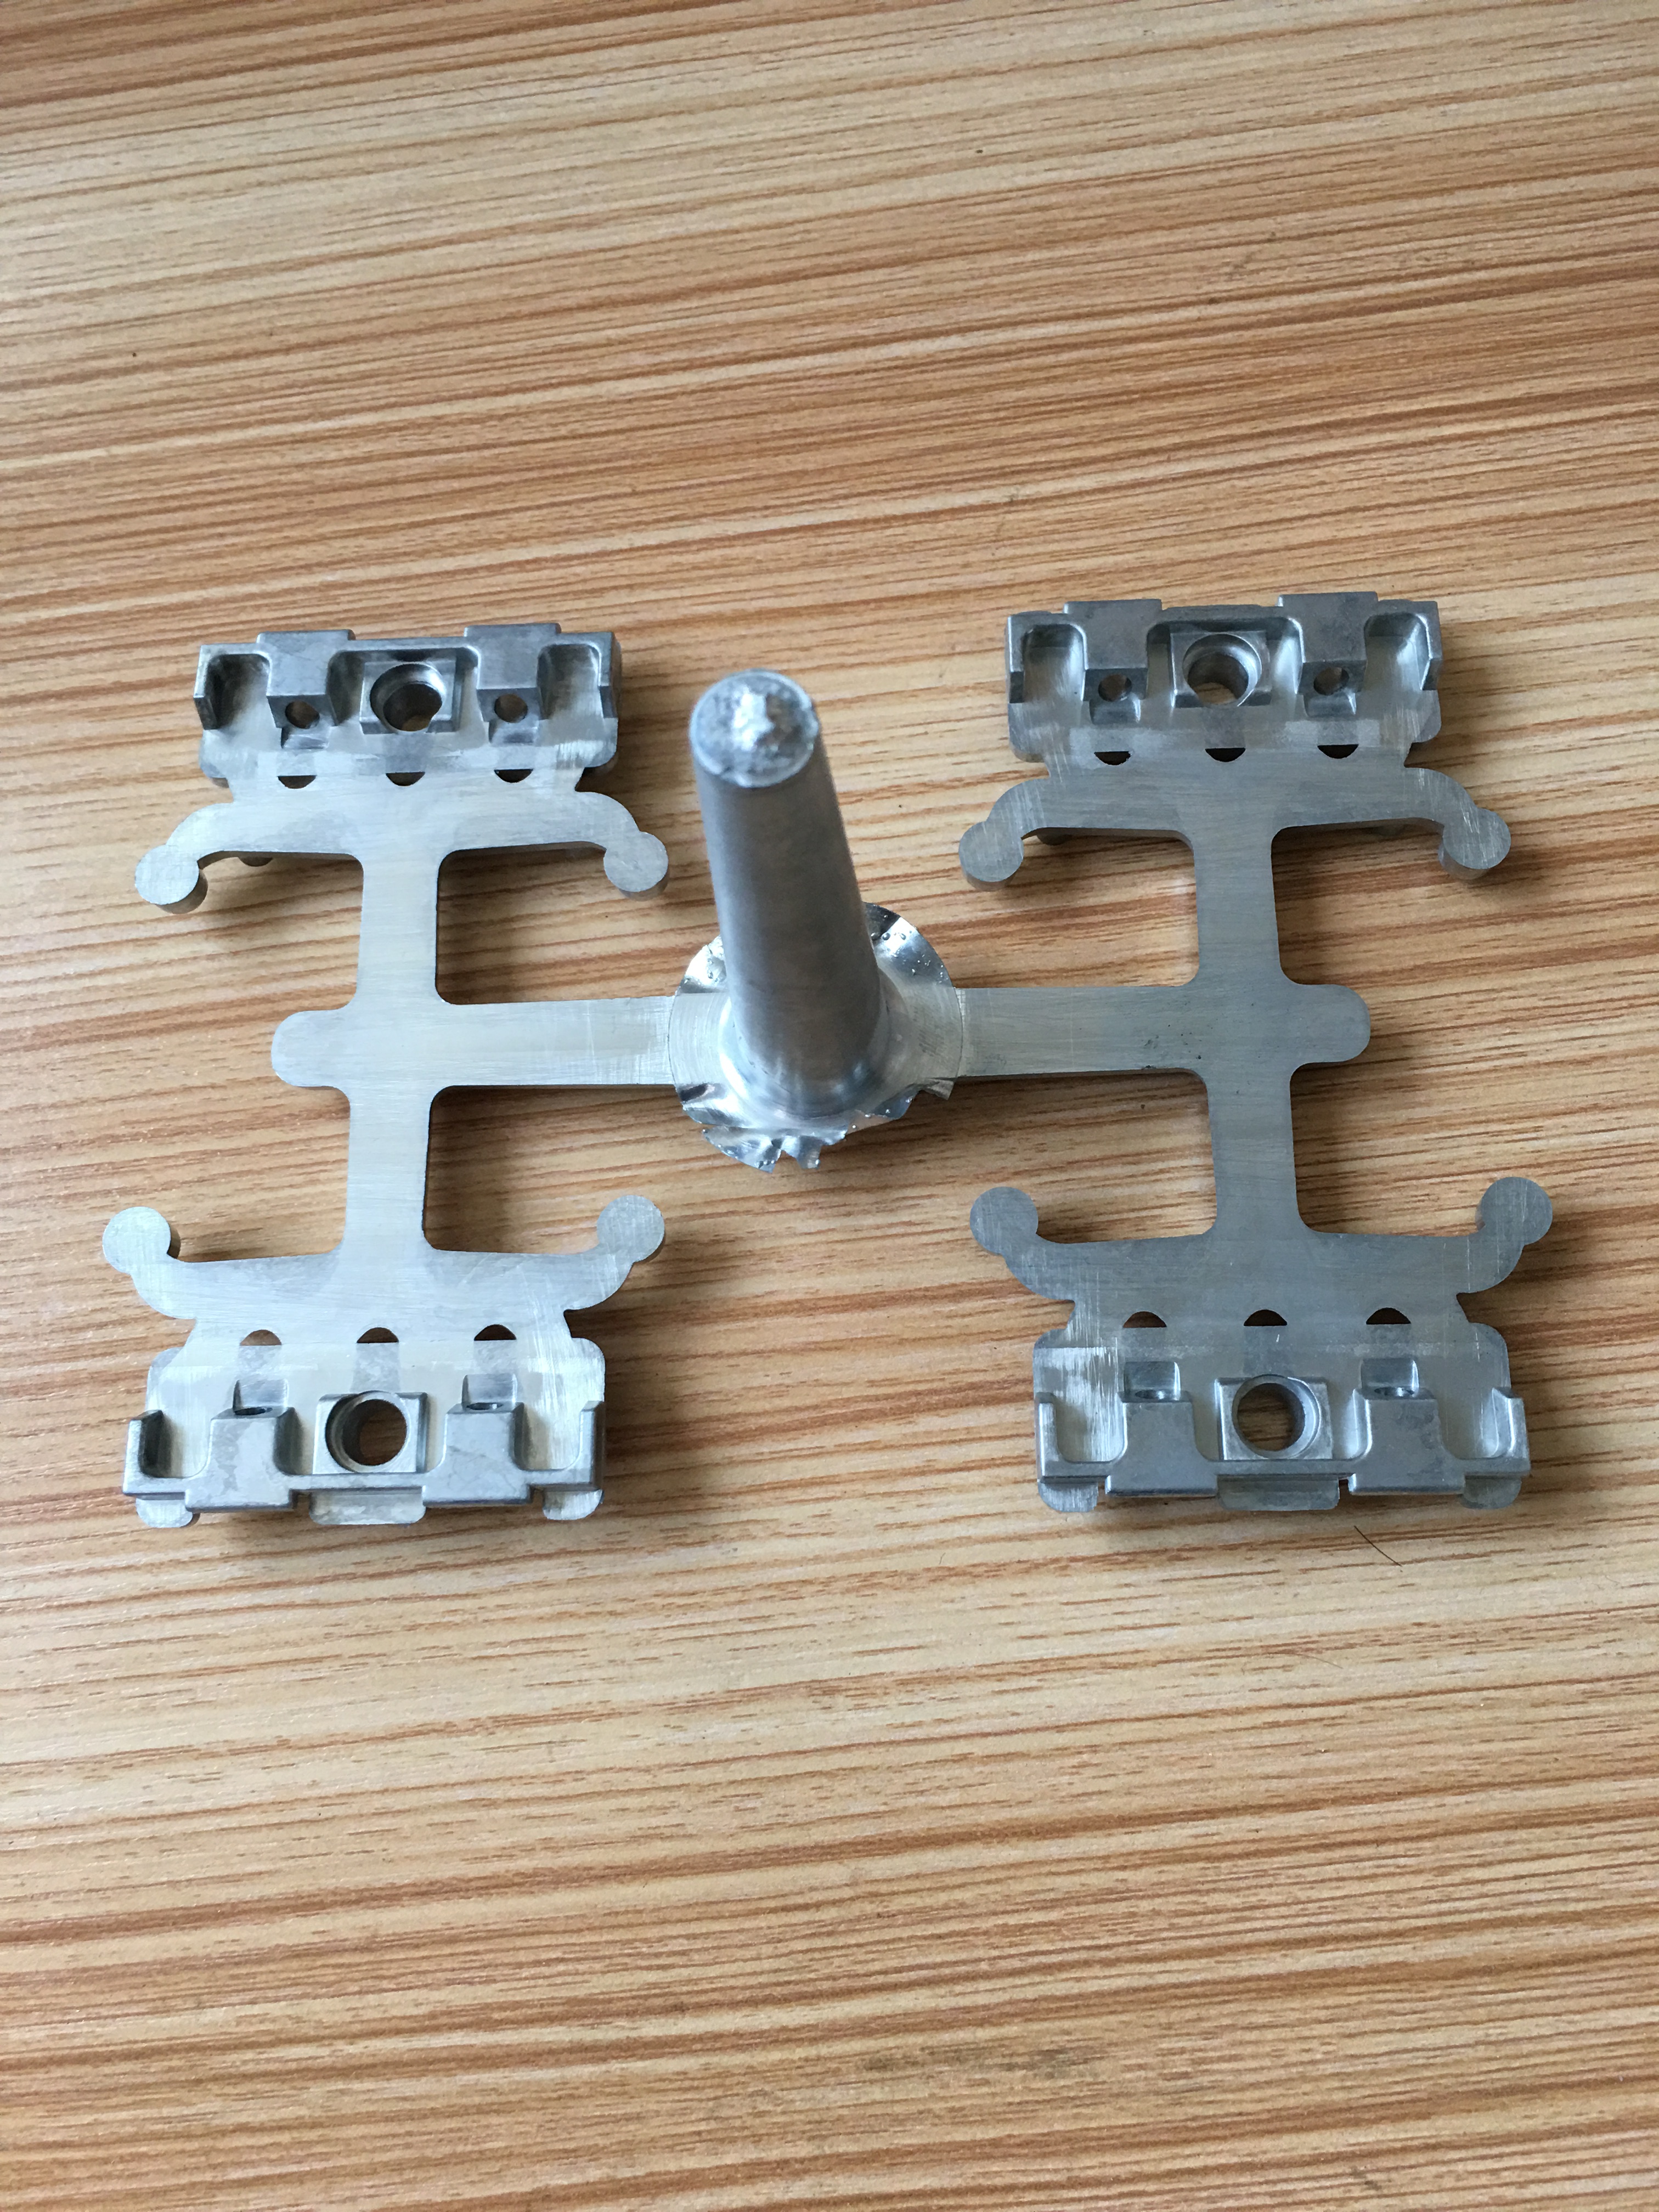 As a plastic spoon mould suppliers,what are the main materials used in mold manufacturing?